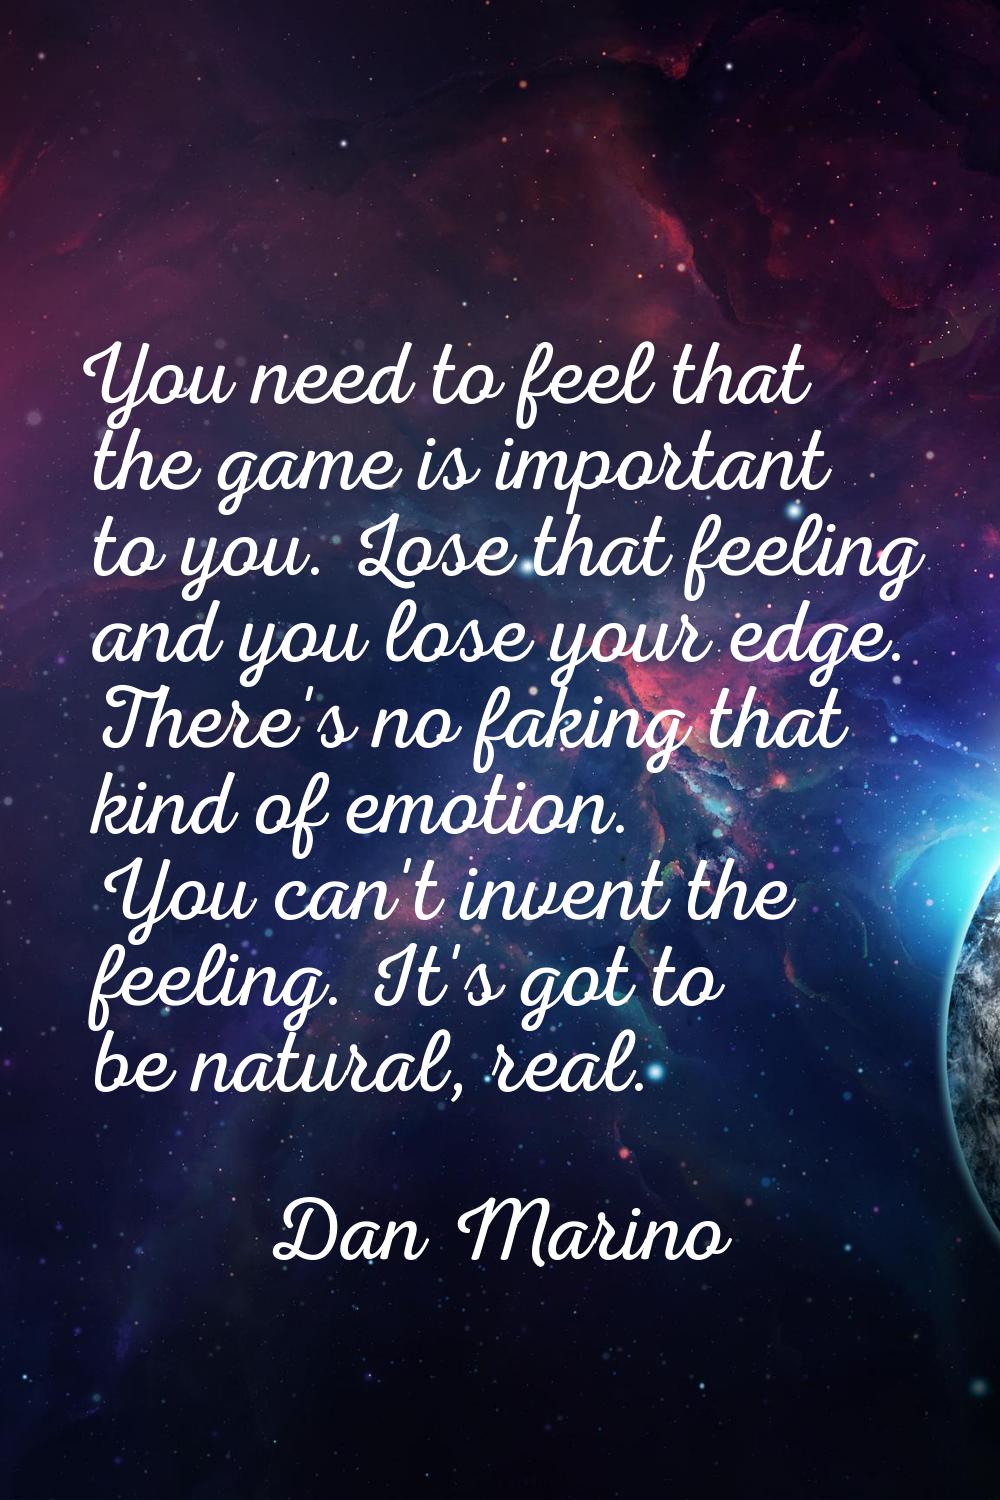 You need to feel that the game is important to you. Lose that feeling and you lose your edge. There